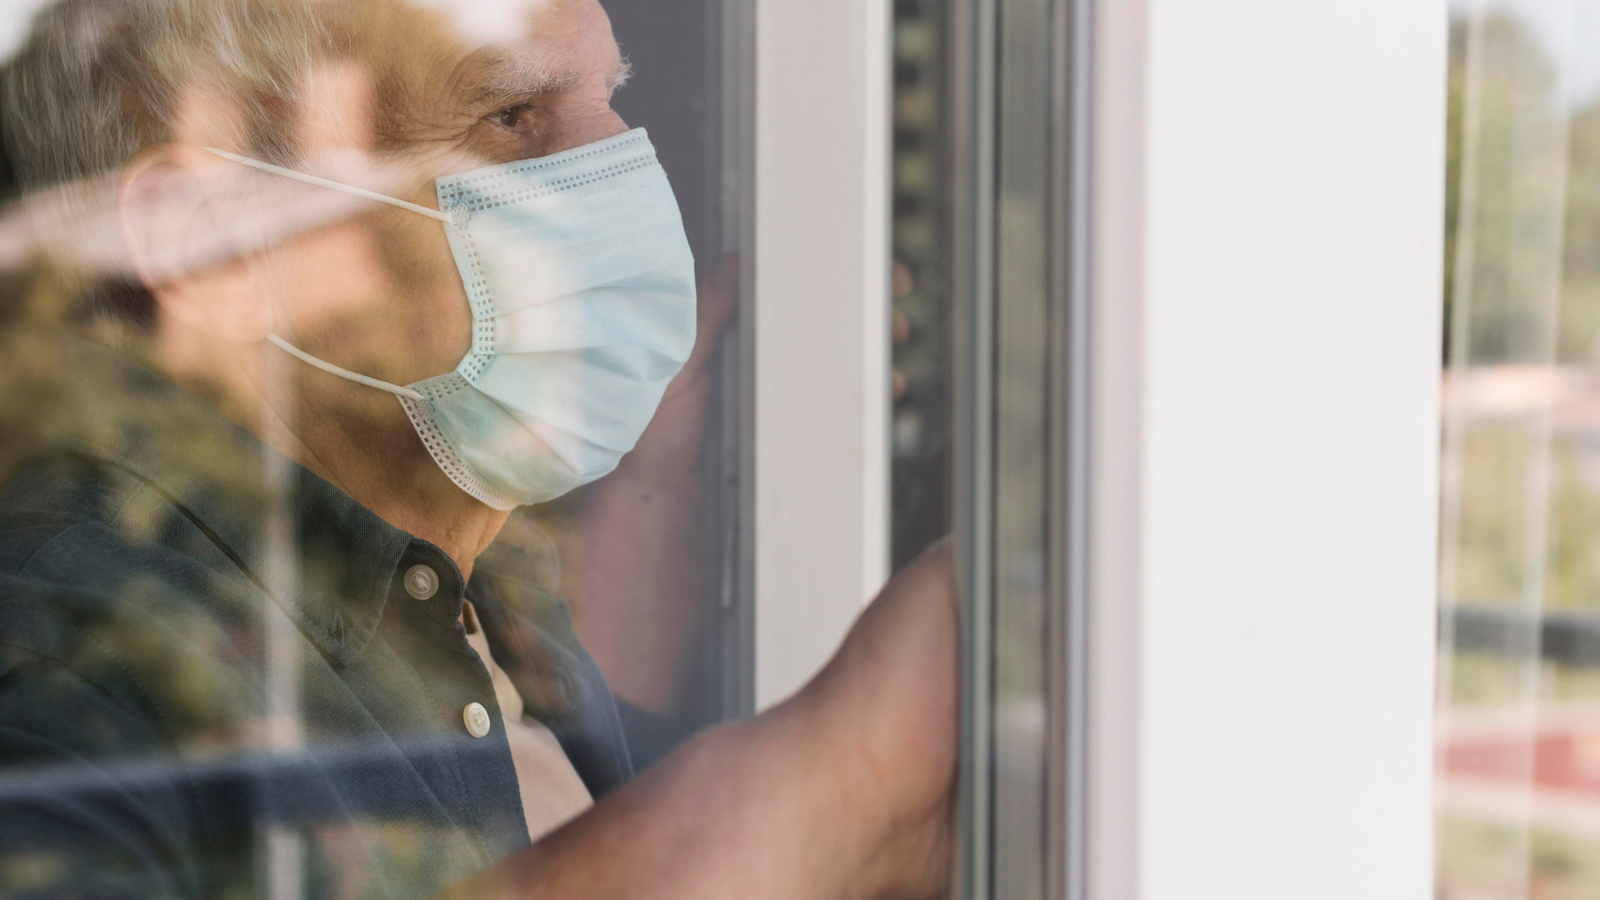 <h5>OUR REPORTS</h5><h4>PPE SHORTAGES</h4><p>Seven months into the pandemic, 20 percent of homes lacked enough supplies</p><p><a href="/feature/usp/nursing-home-safety-during-covid-ppe-shortages" style='text-decoration:underline!important;'>Learn more</a></p>